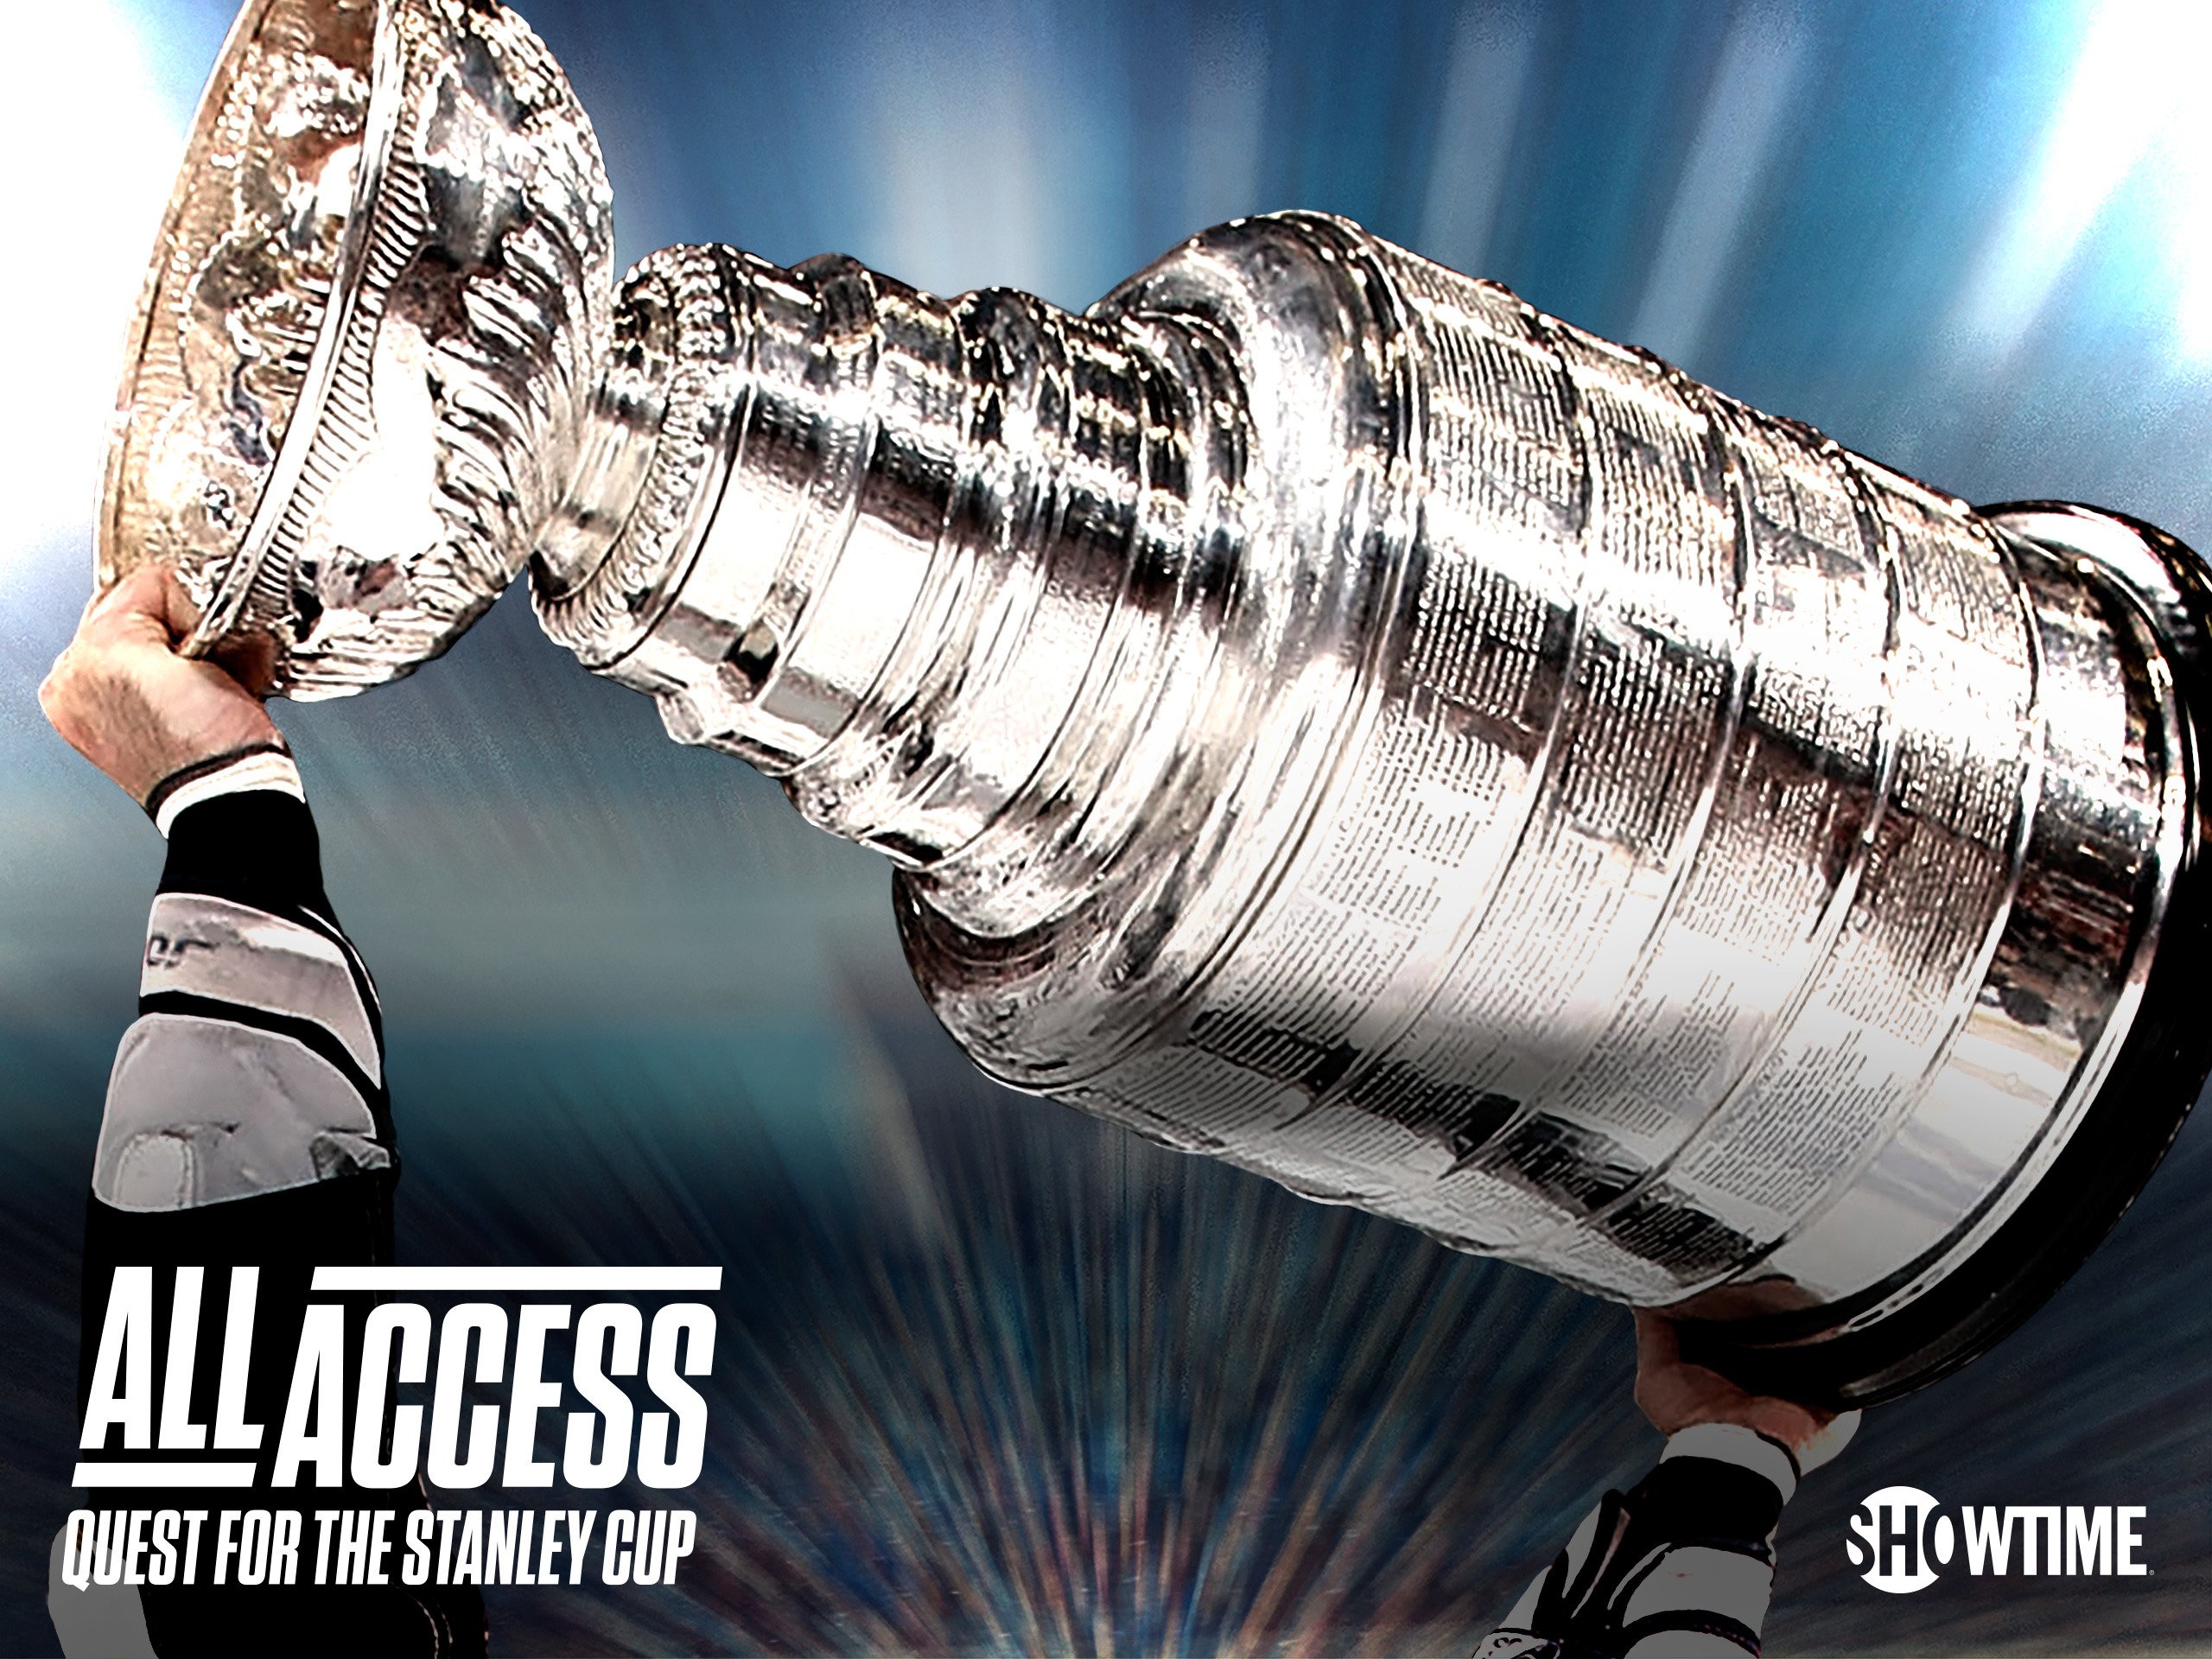 All Access: Quest for the Stanley Cup on Showtime